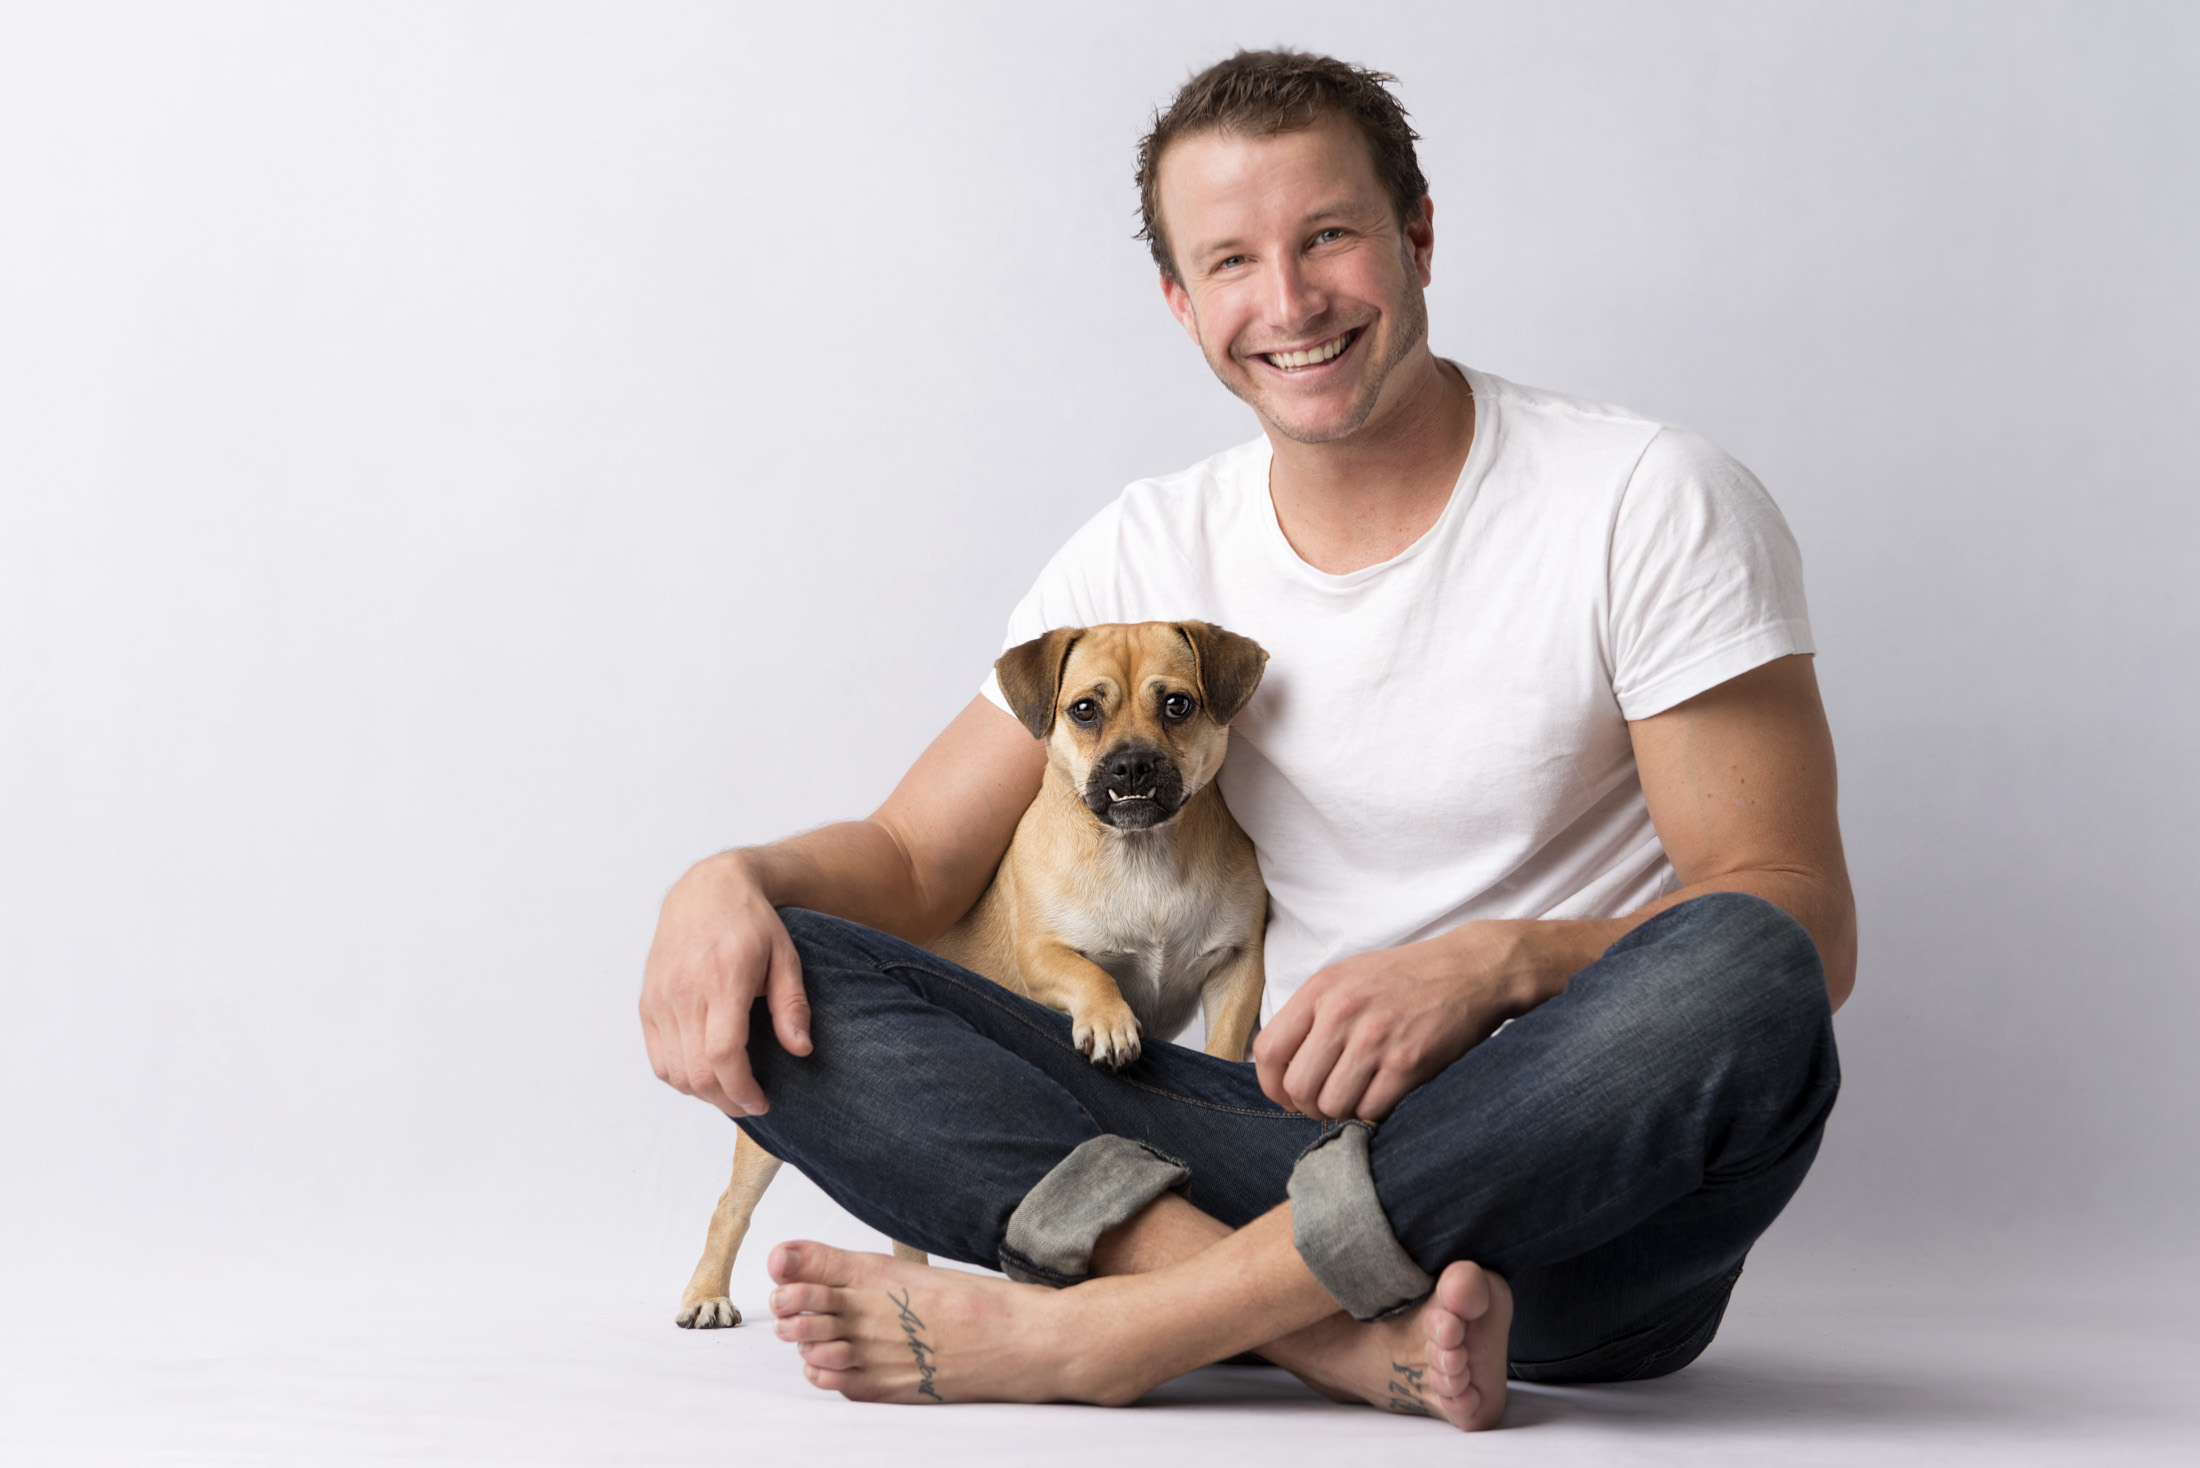 X Factor's Luke Jacobz helps out for a worthy cause ...